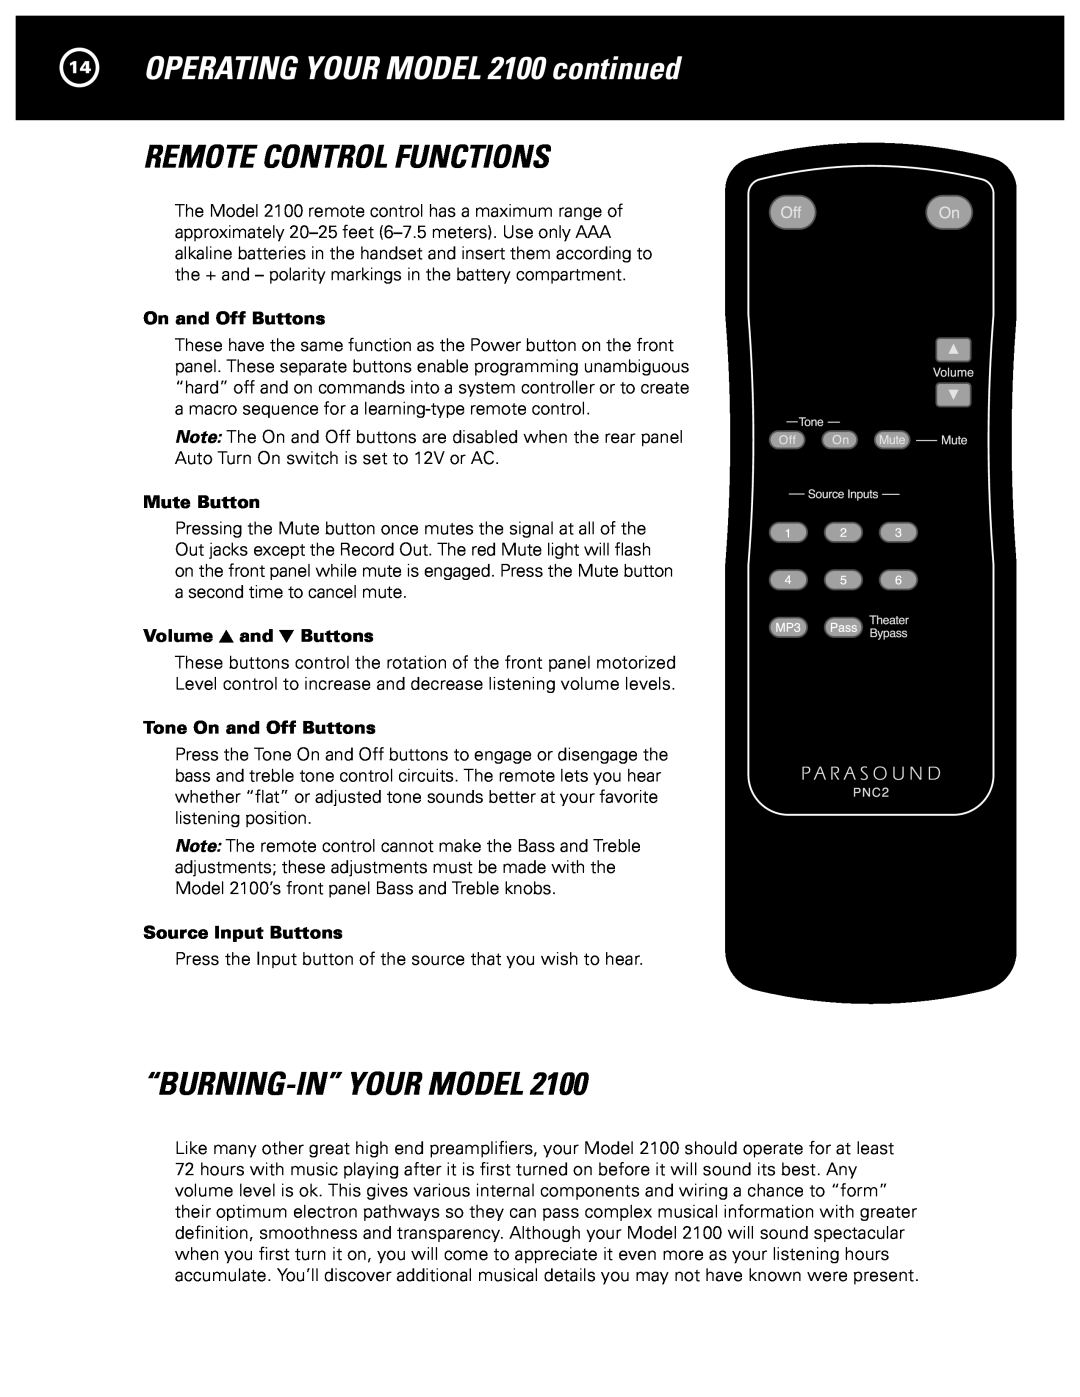 Parasound 14OPERATING YOUR MODEL 2100 continued, Remote Control Functions, “Burning-In”Your Model, On and Off Buttons 